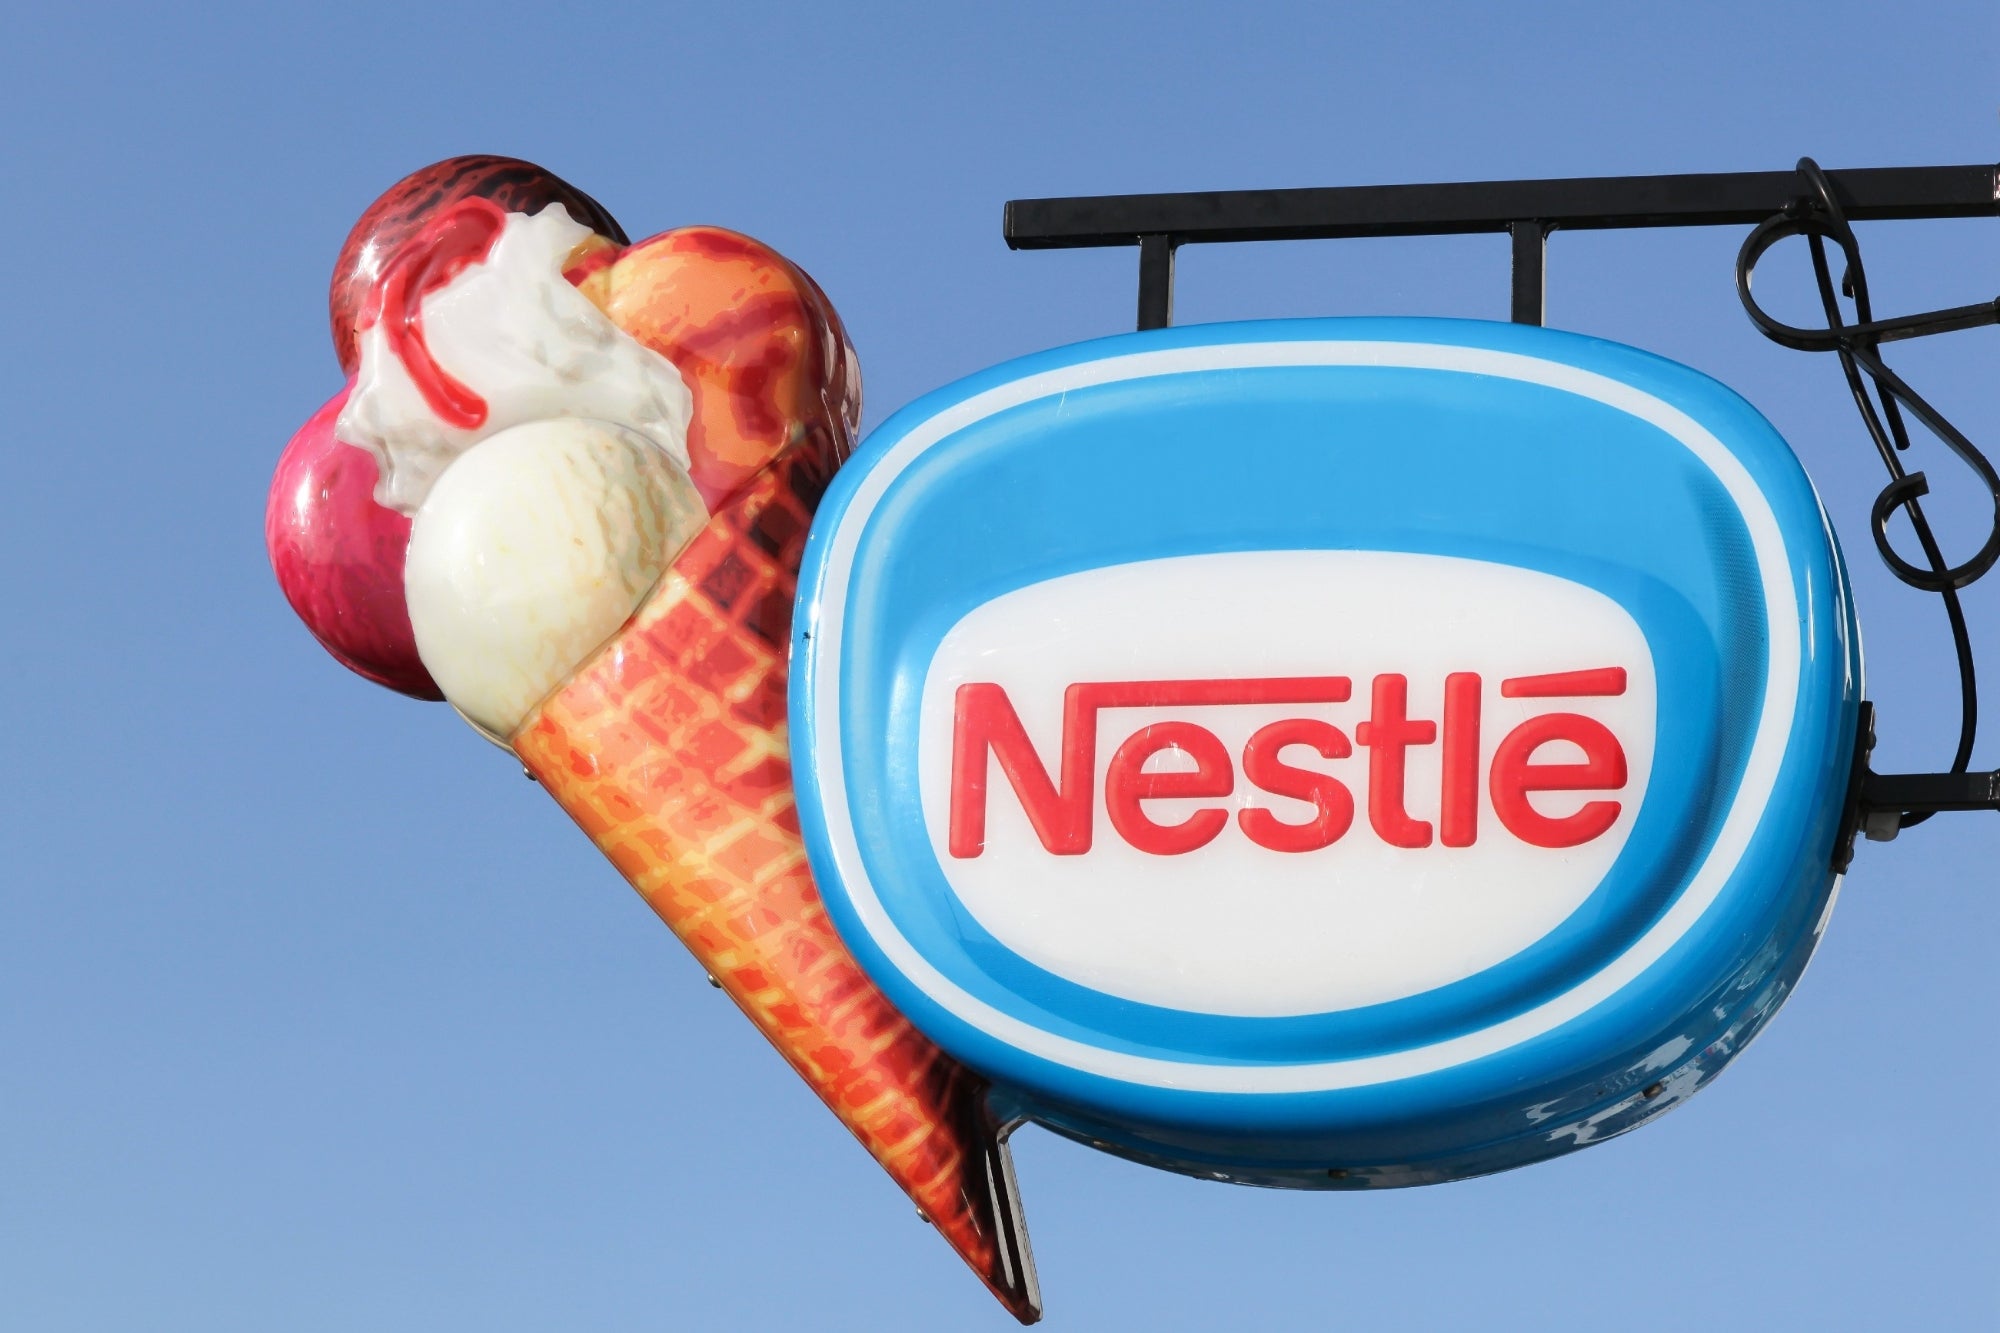 Nestlé and other brands recall ice cream contaminated with carcinogenic